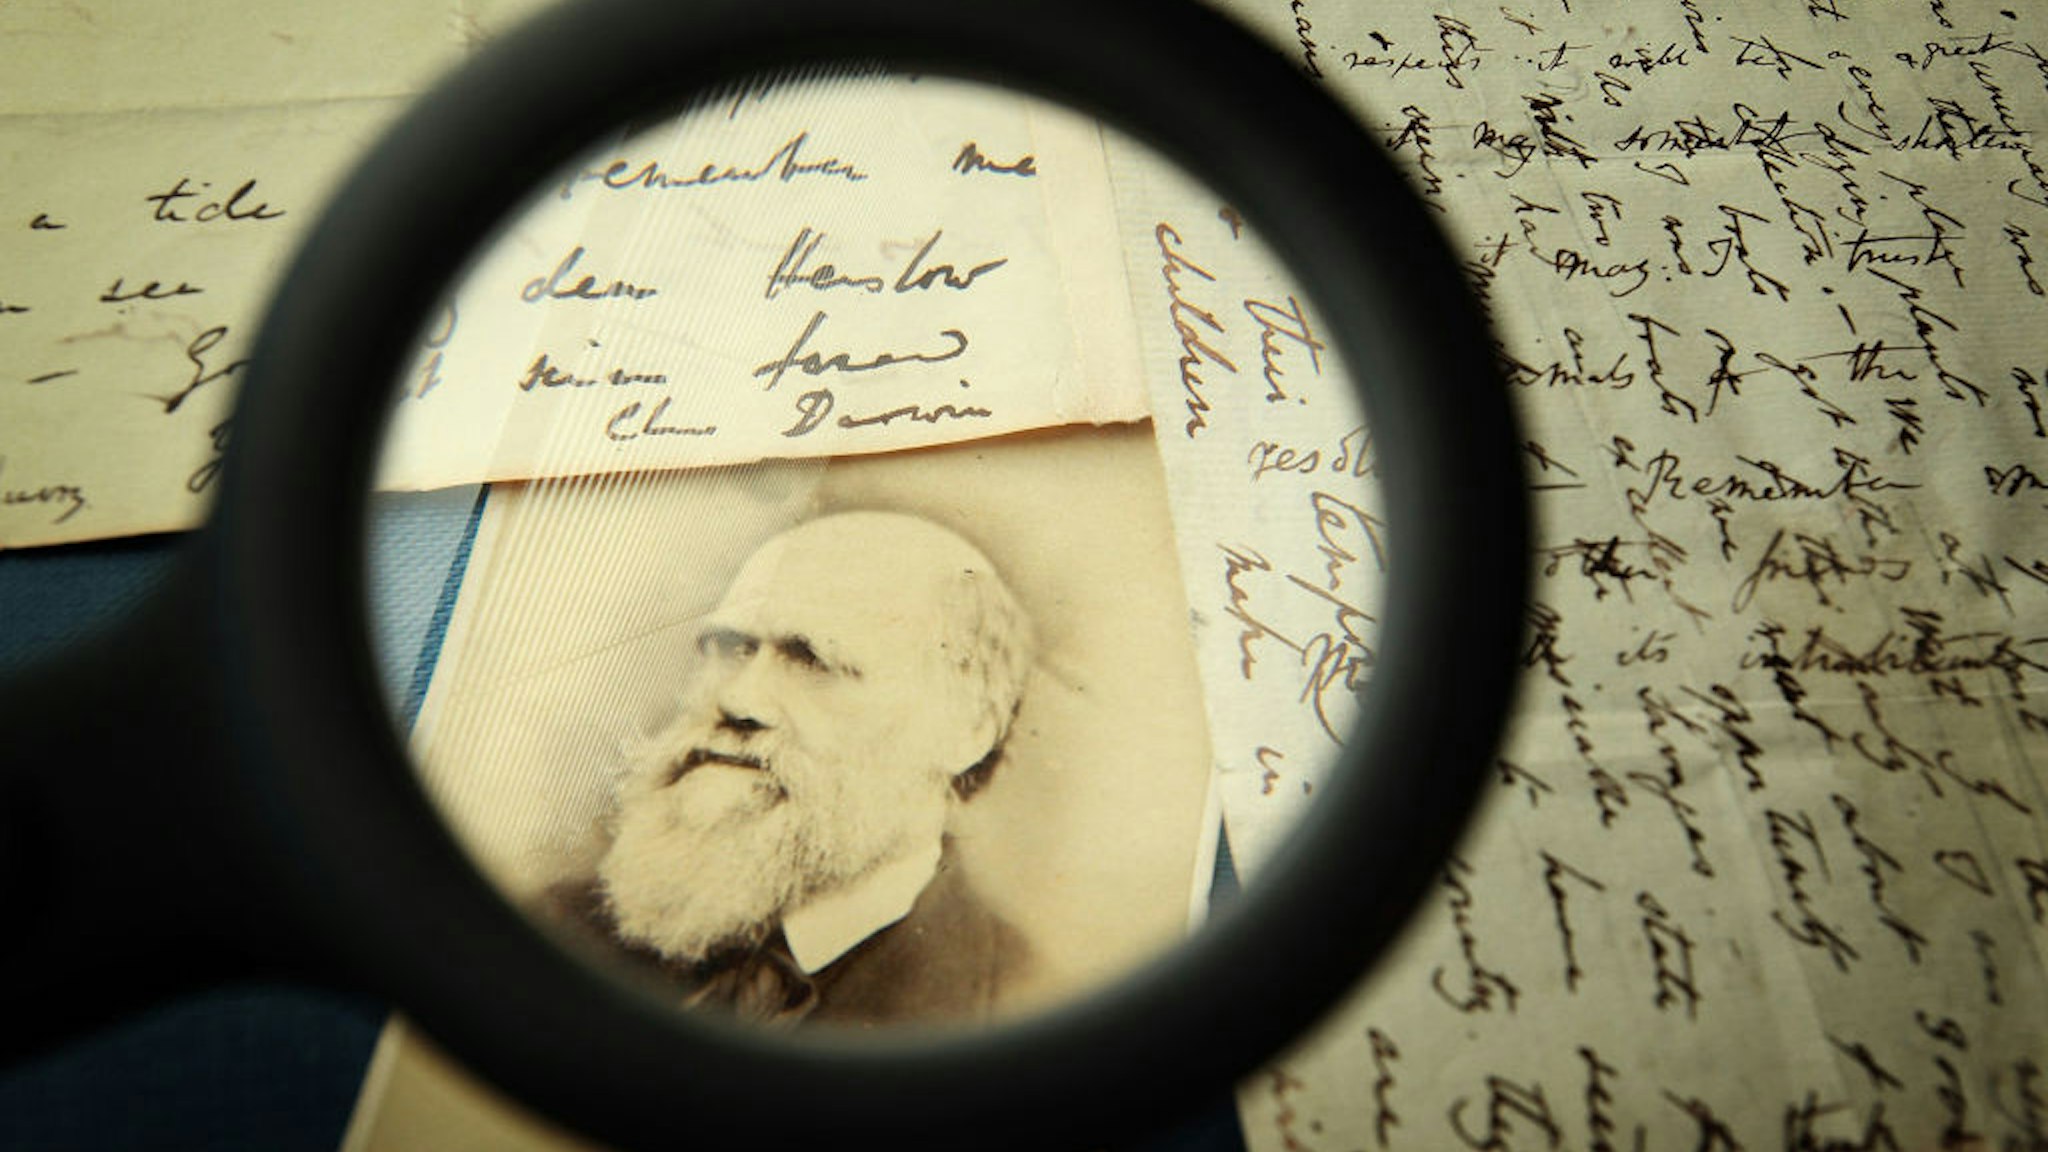 ONDON, ENGLAND - MARCH 25: Original letters from Charles Darwin are displayed at the Herbaruim library on March 25, 2009 at the Royal Botanic Gardens, Kew in London. Darwin wrote the letter (R) to his mentor Reverend John Henslow aboard HMS Beagle in April 1833 - writing two ways - as paper was expensive. (Photo by Peter Macdiarmid/Getty Images)